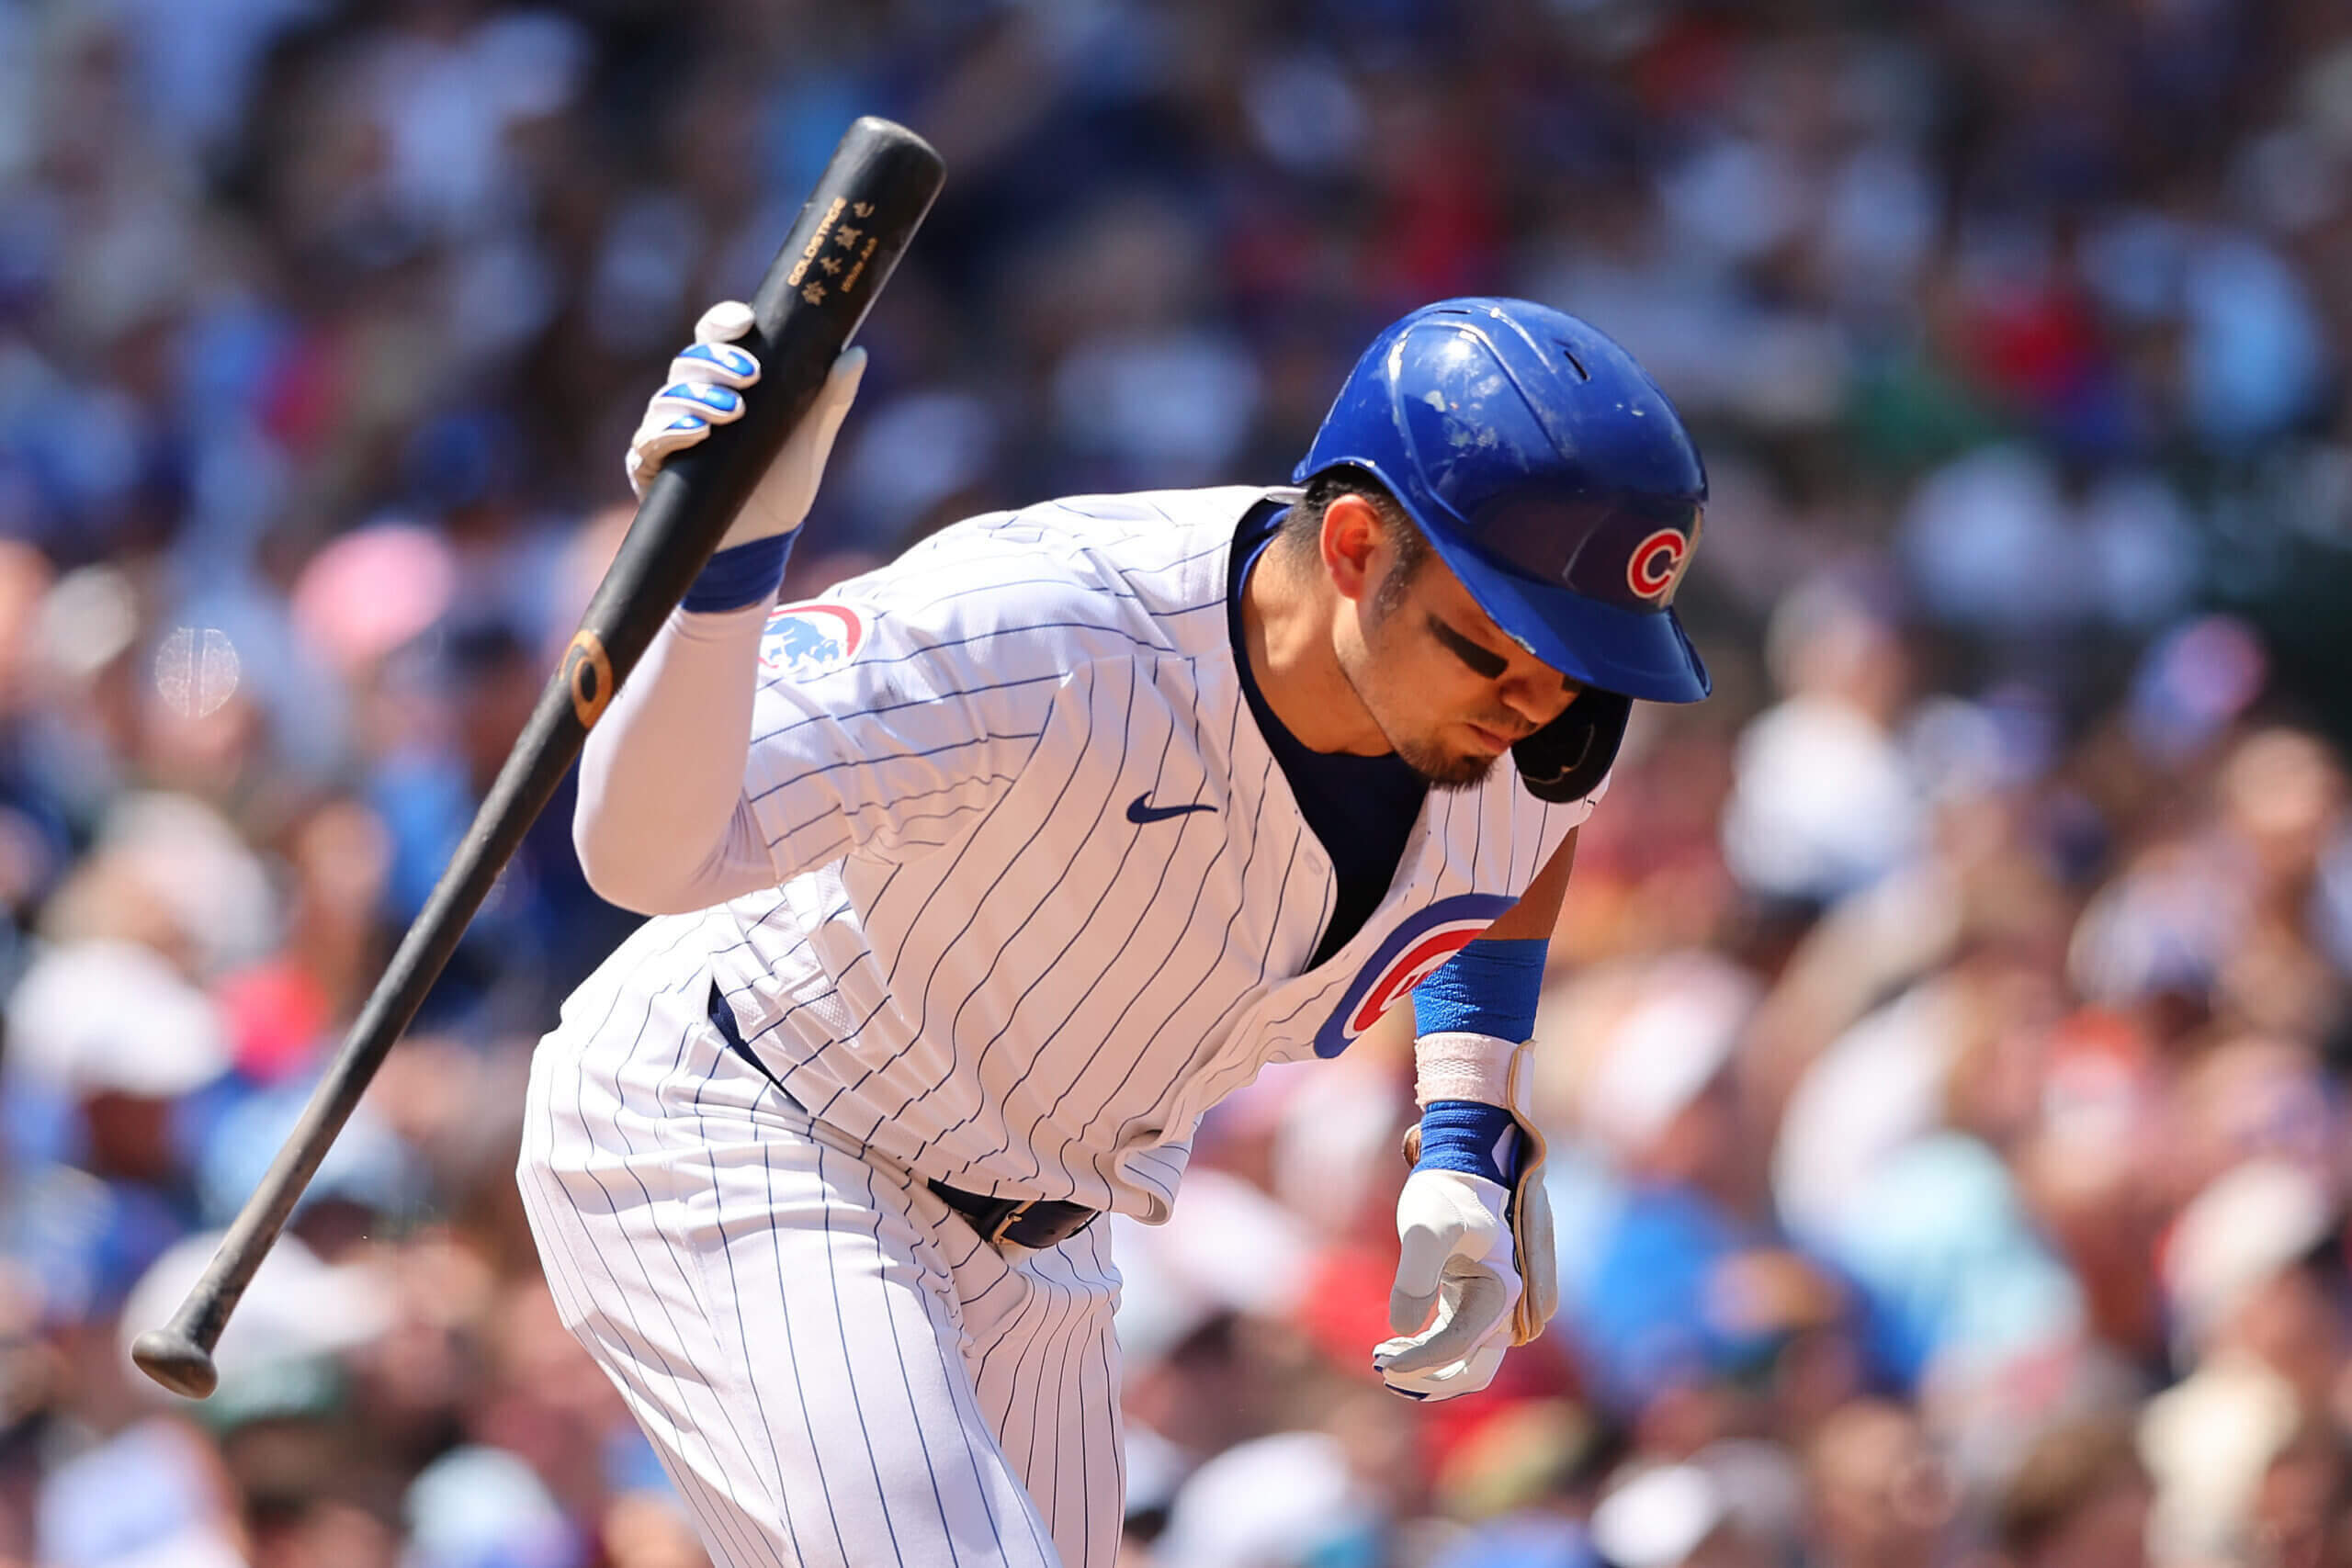 After a hot start to the season, the Cubs offense has hit a nearly month-long skid